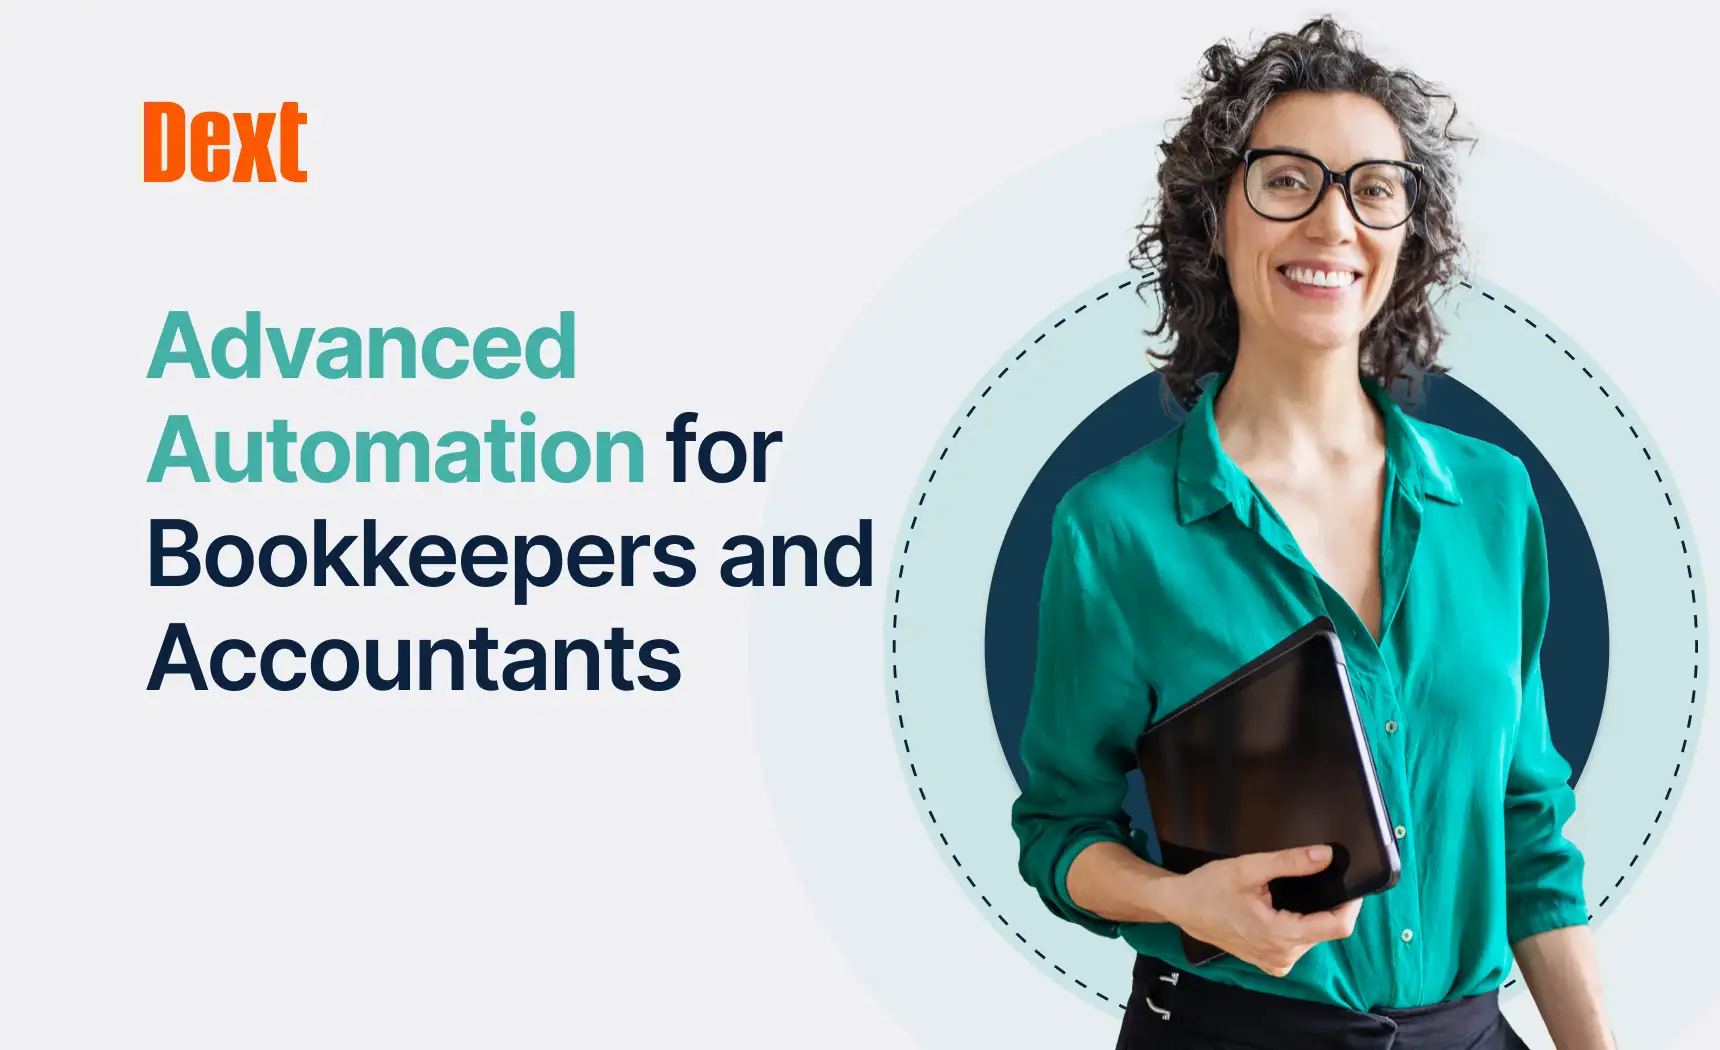 Advanced Automation for Bookkeepers and Accountants image